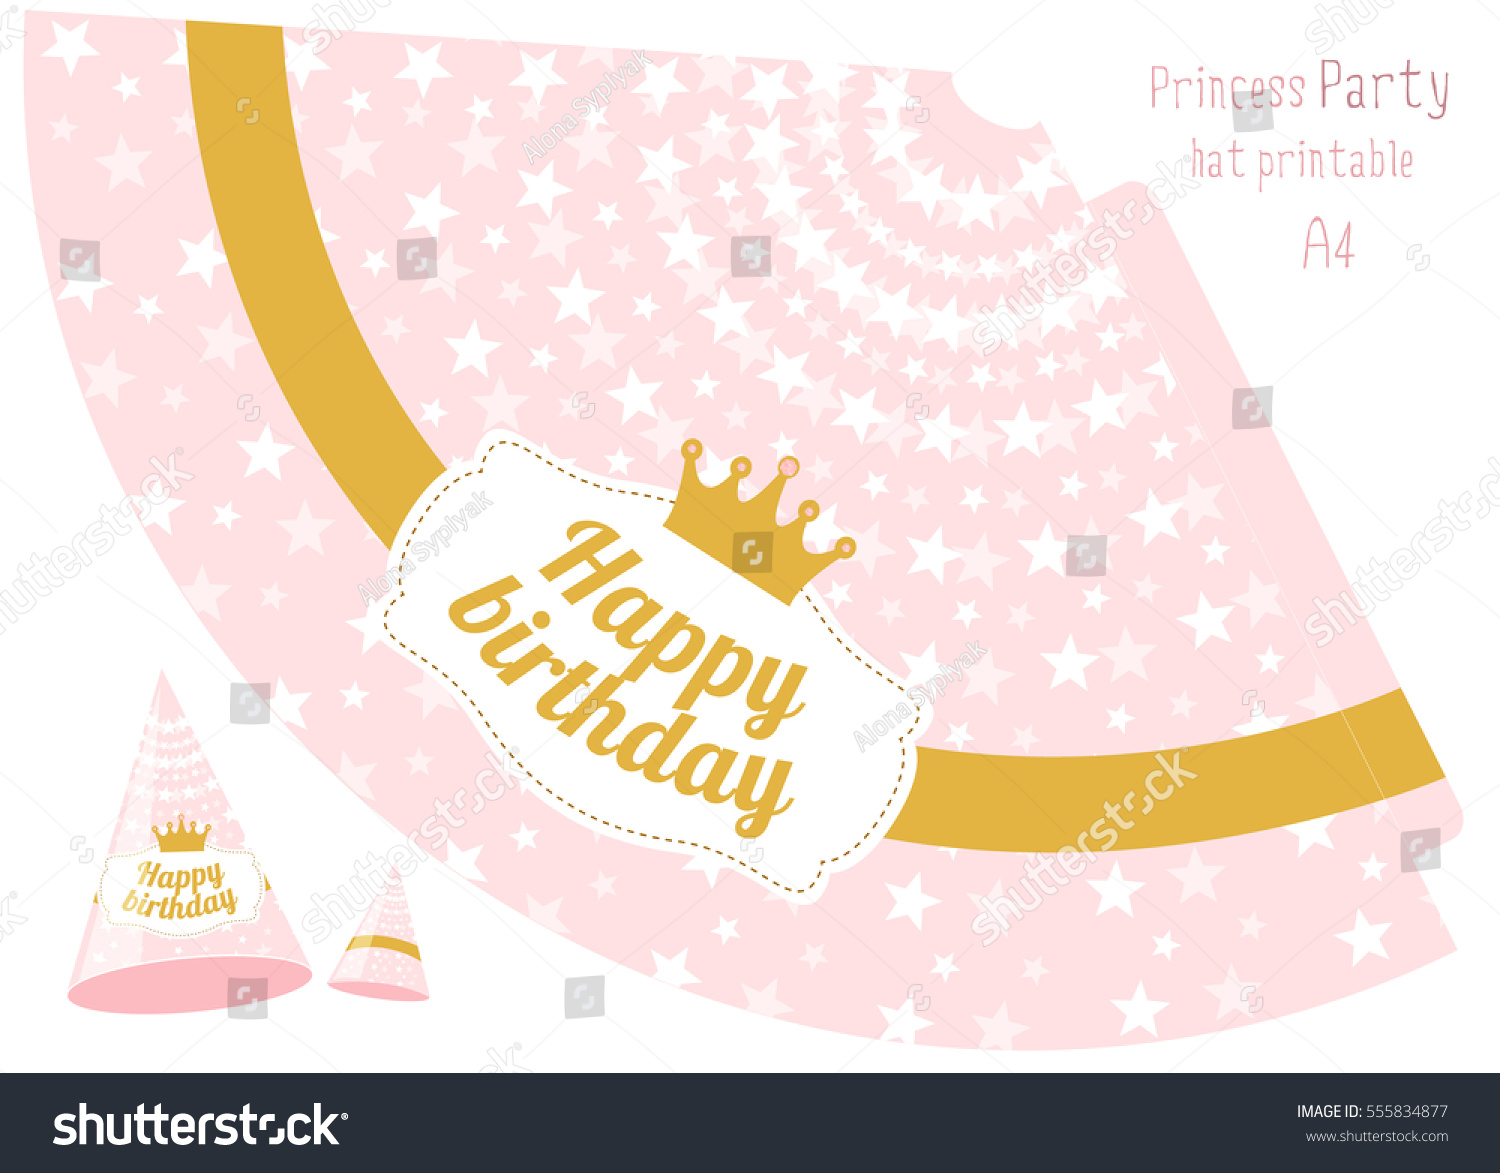 Birthday Party Hat Template from image.shutterstock.com